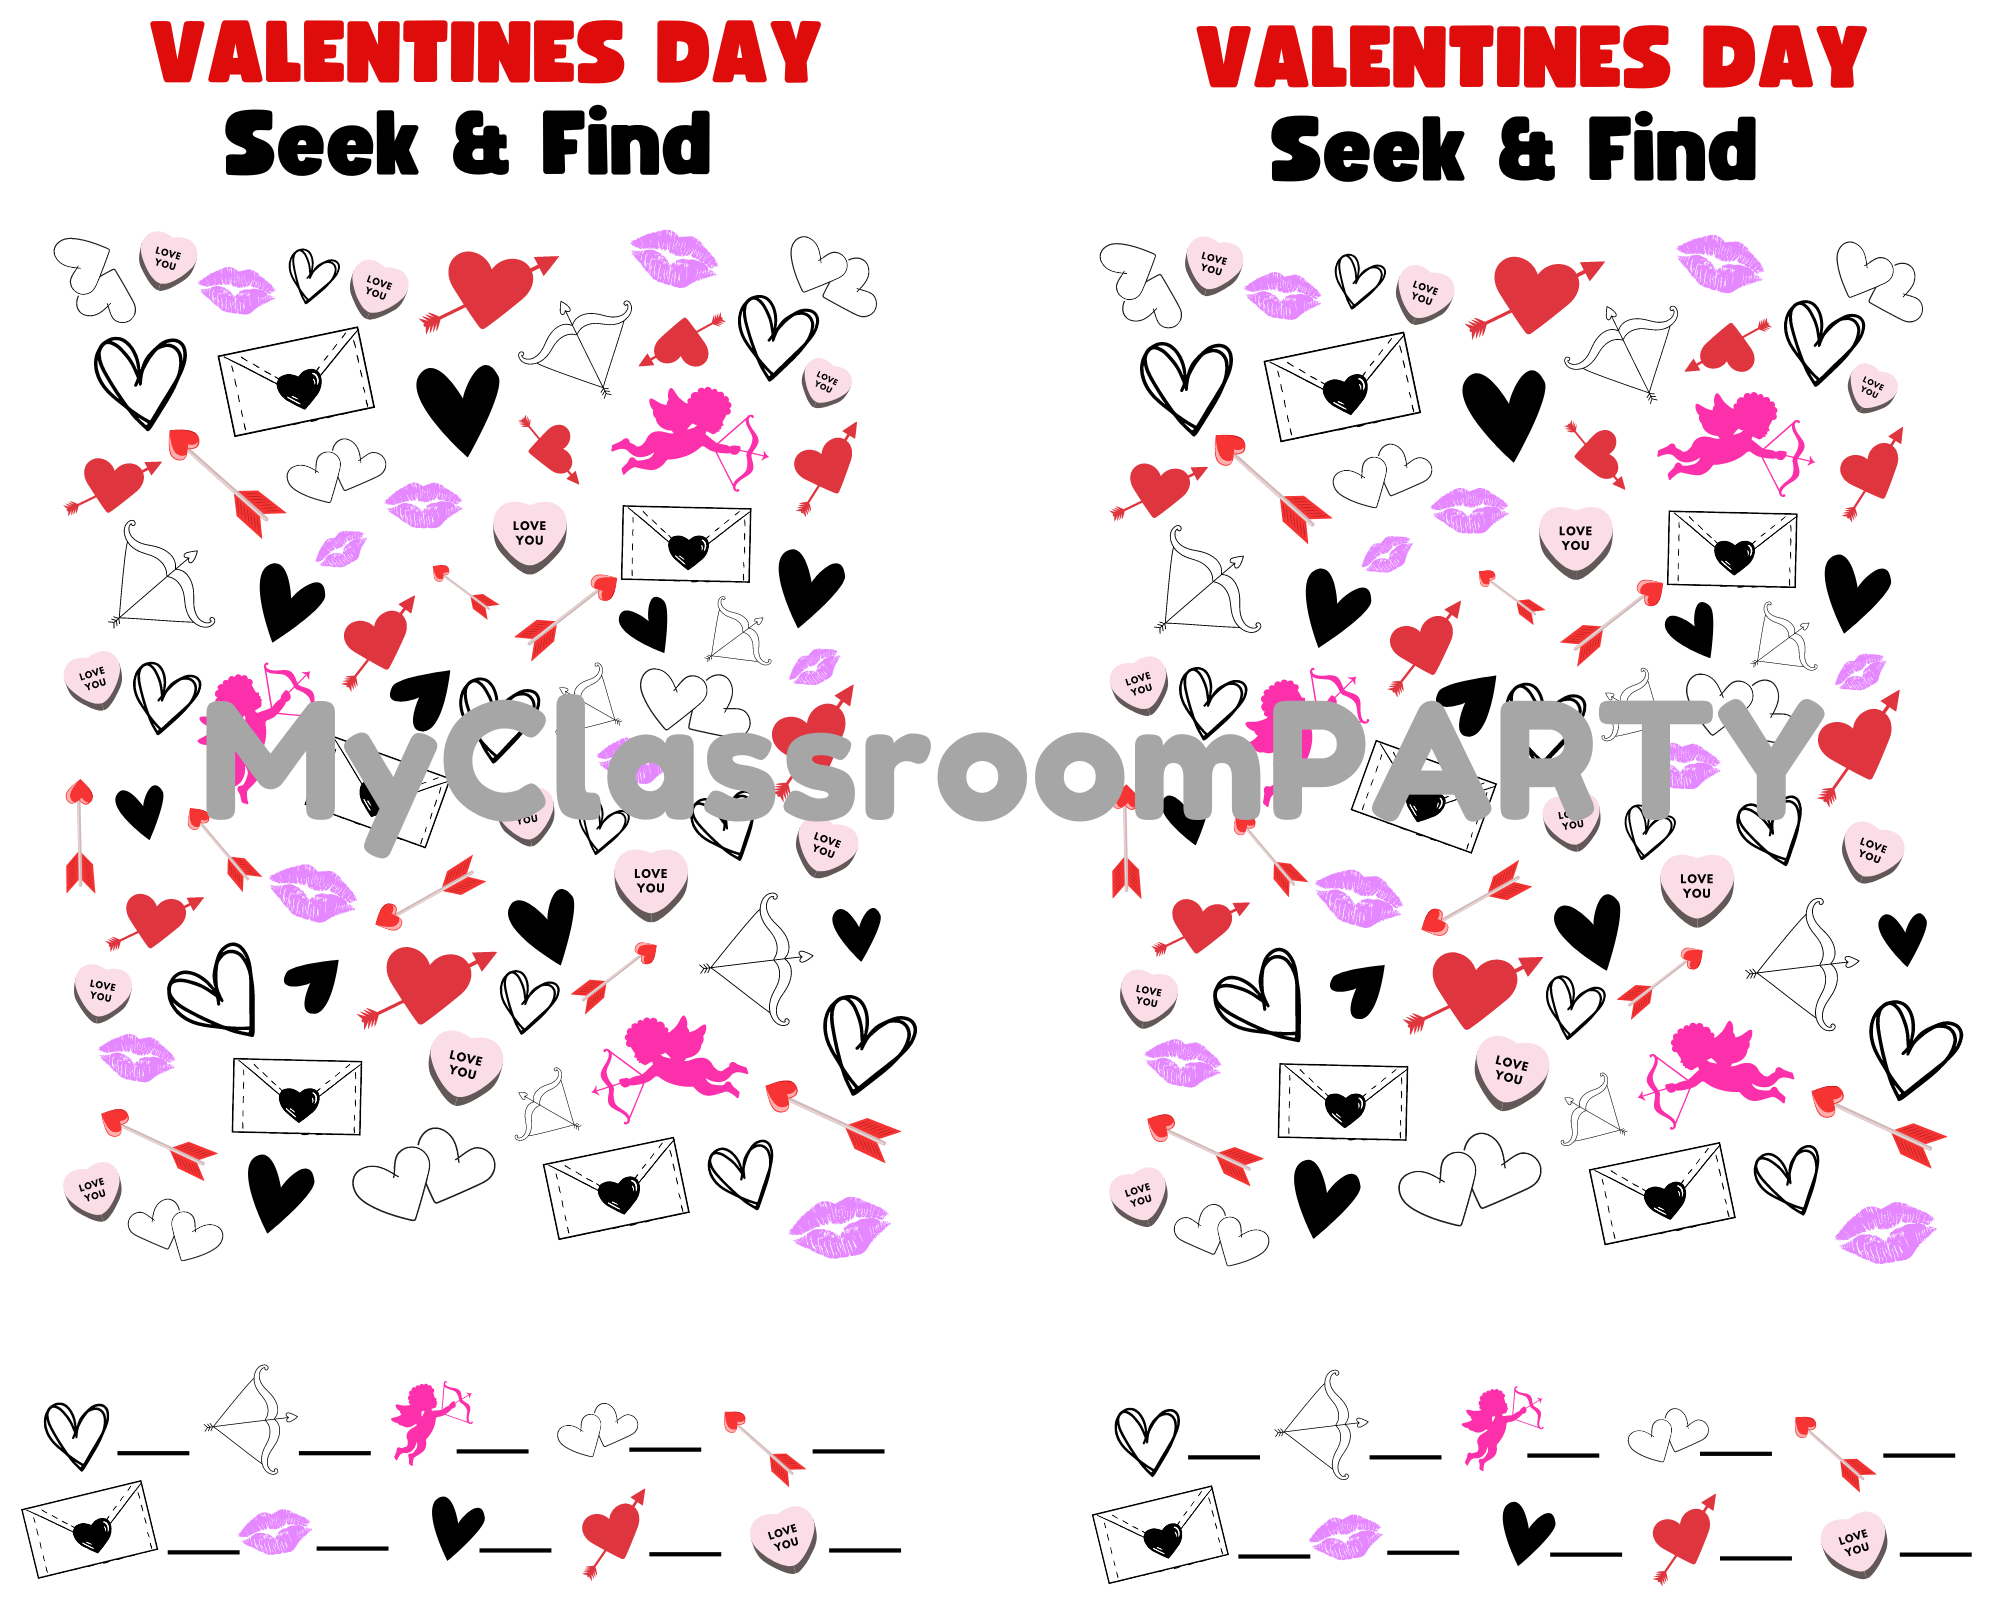 This fun Valentine's Day themed printable is perfect for your school Valentine's Day party!  Students will love this Valentine's Day seek & find. 